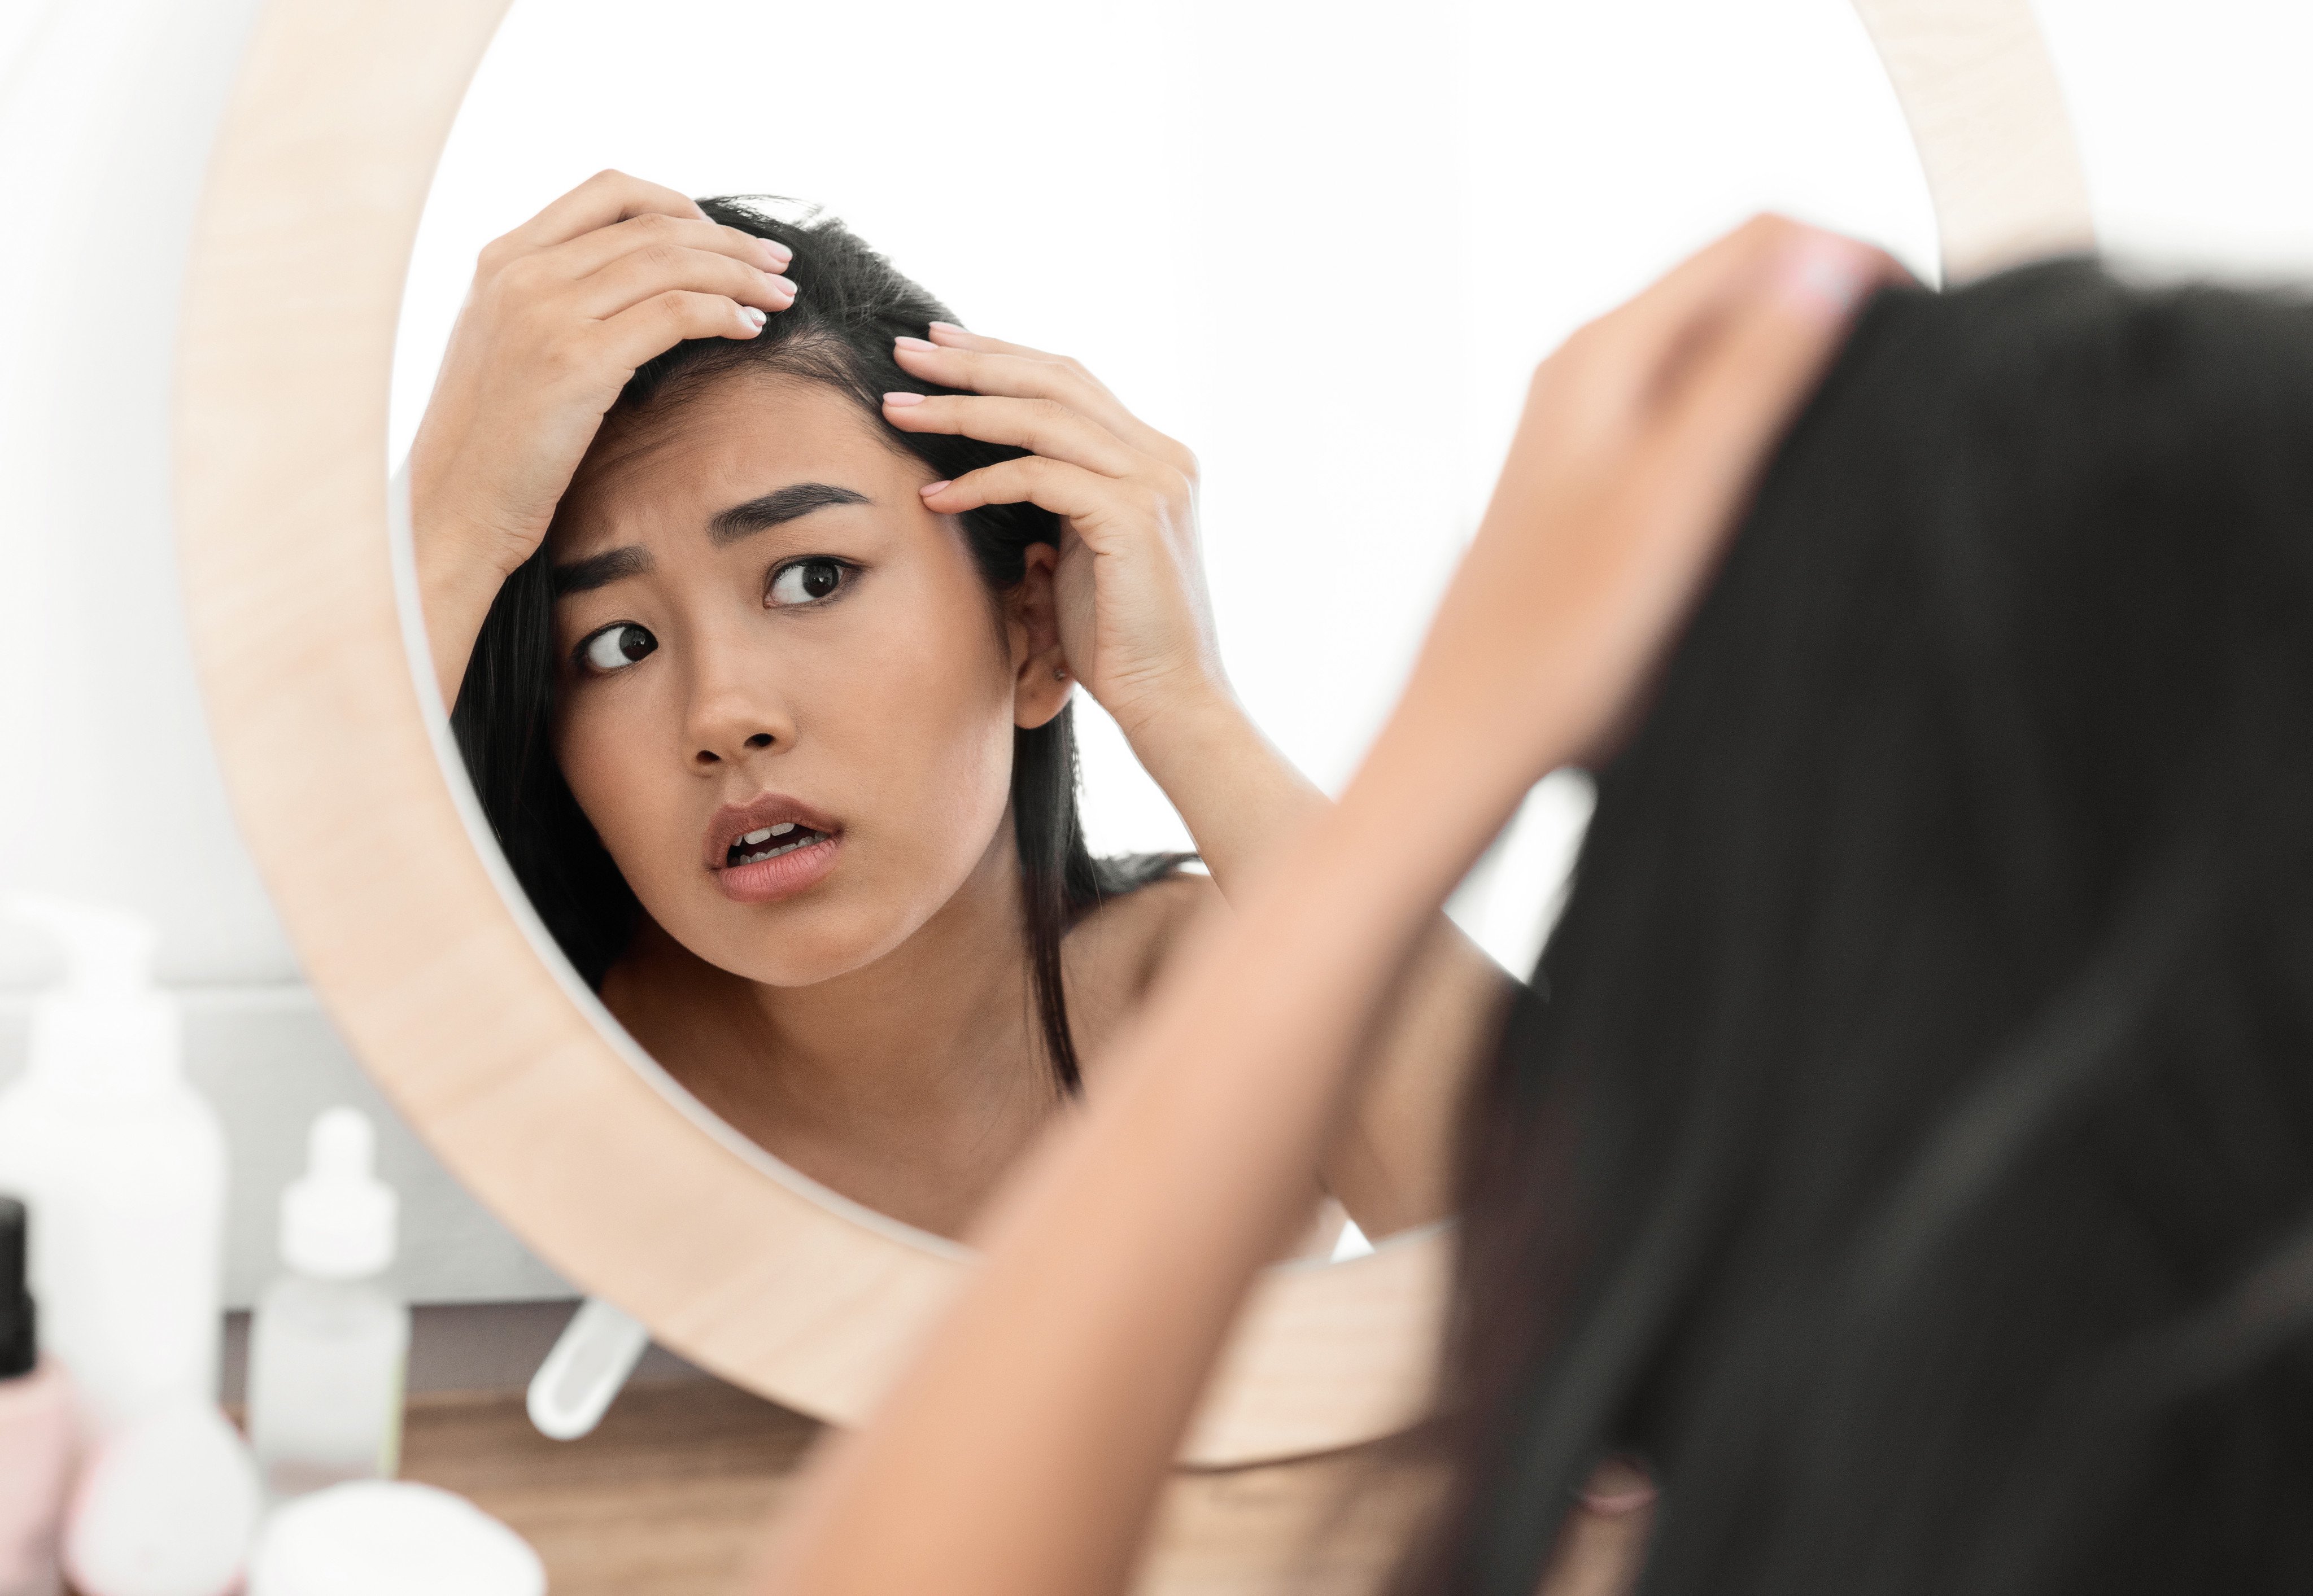 Hair issues afflict one in six people in China, and a new AI-powered feature on Alipay is promises to help people self-assess whether they are balding. Photo: Shutterstock